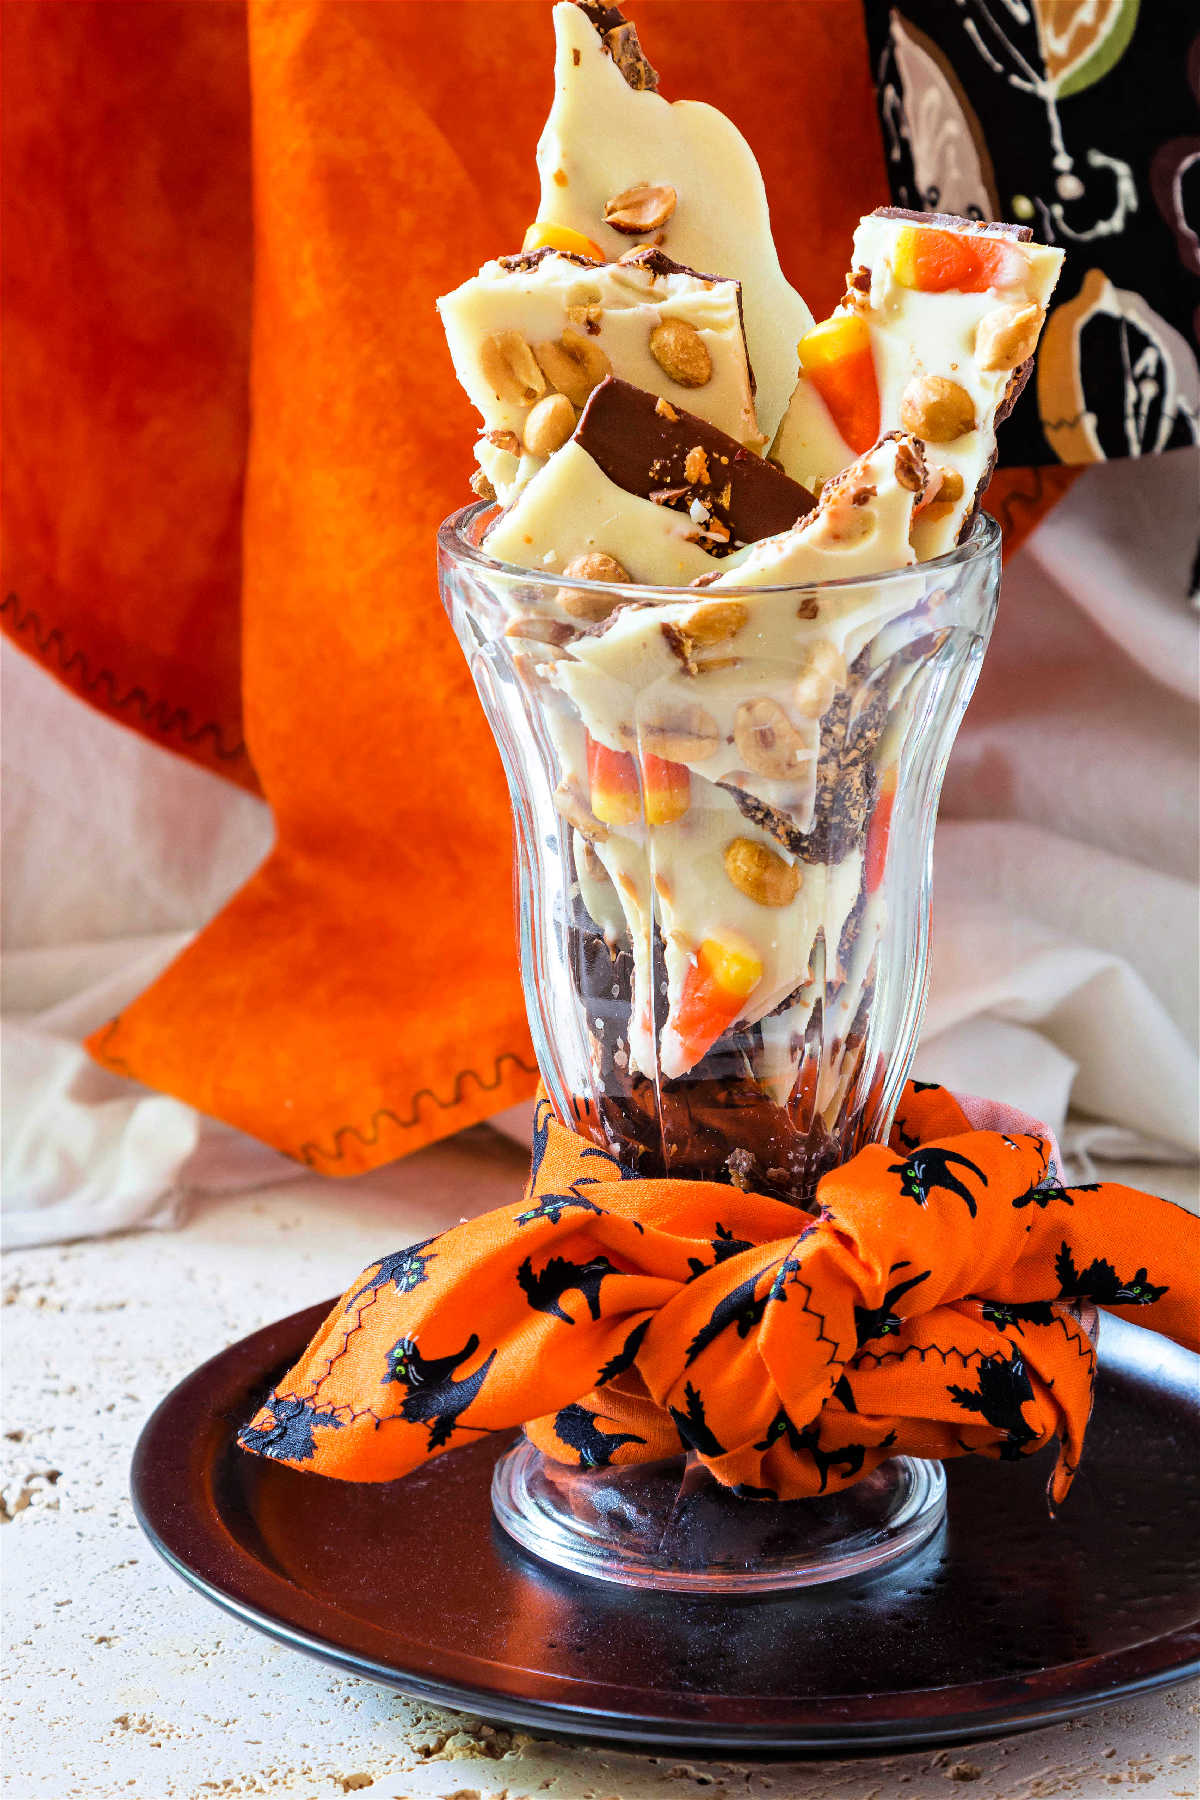 A tall glass with an orange napkin decorated with black cats tied around it and filled with candy.